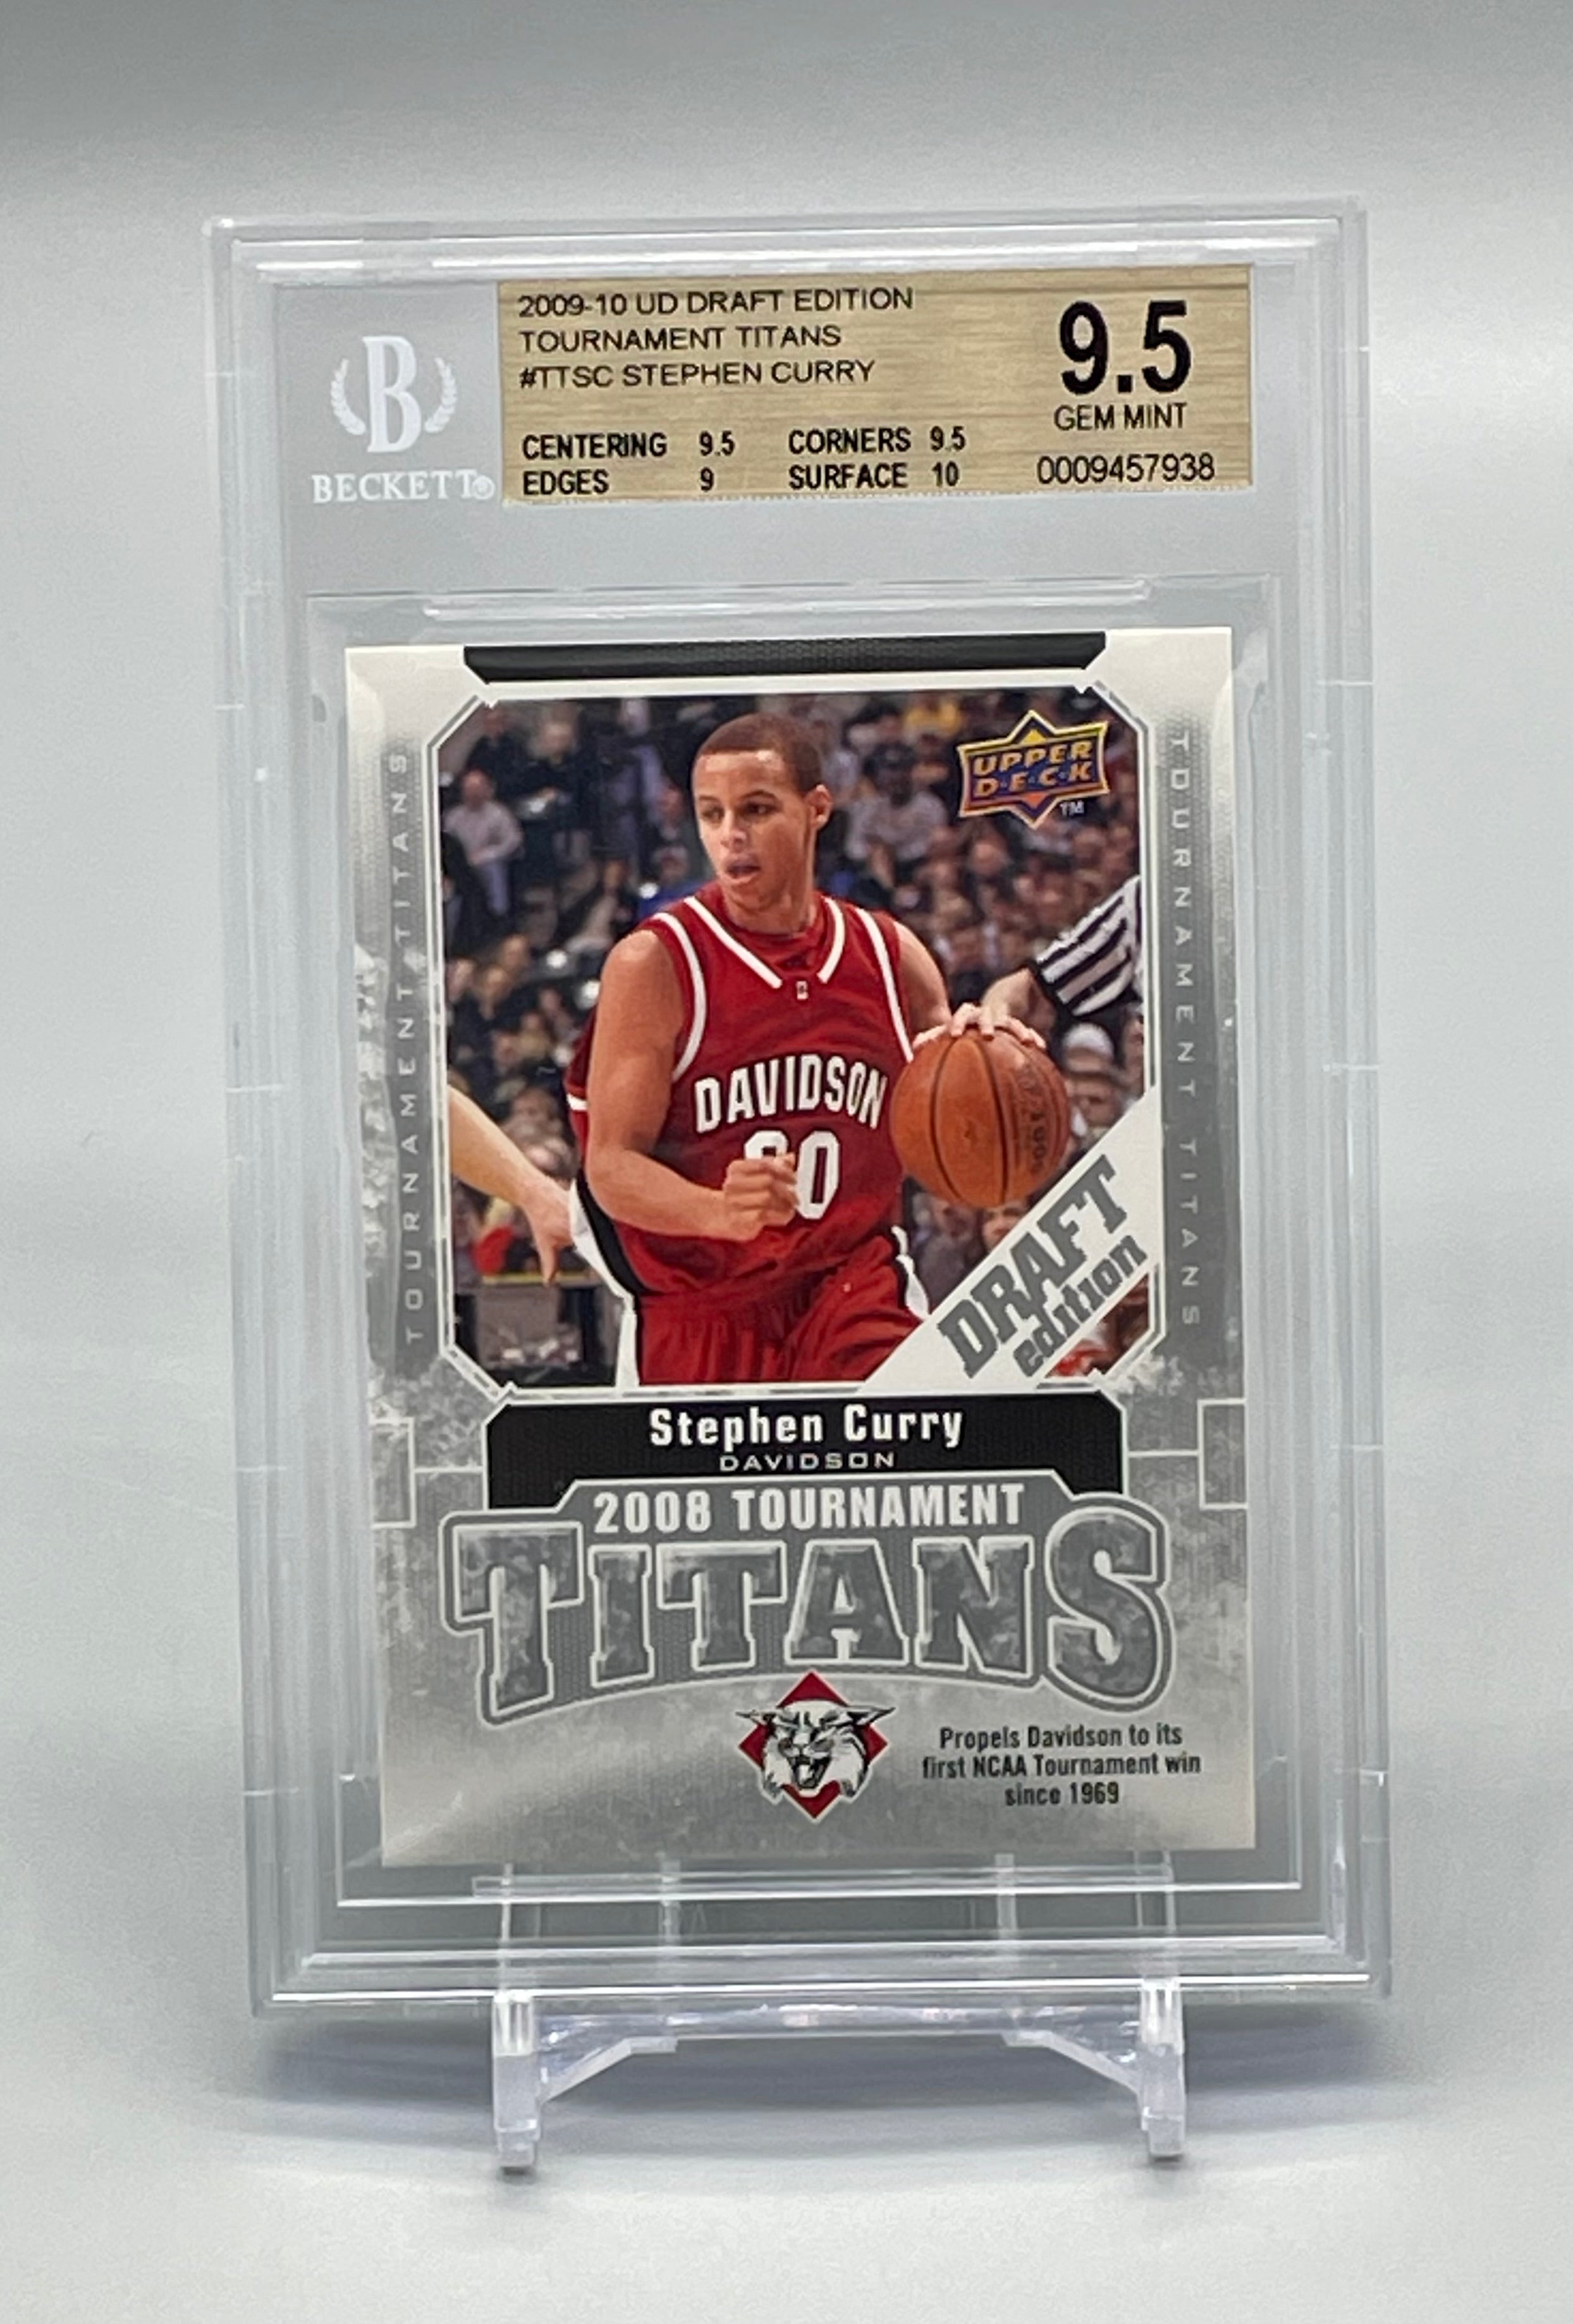 Stephen Curry Draft Edition Rookie Card